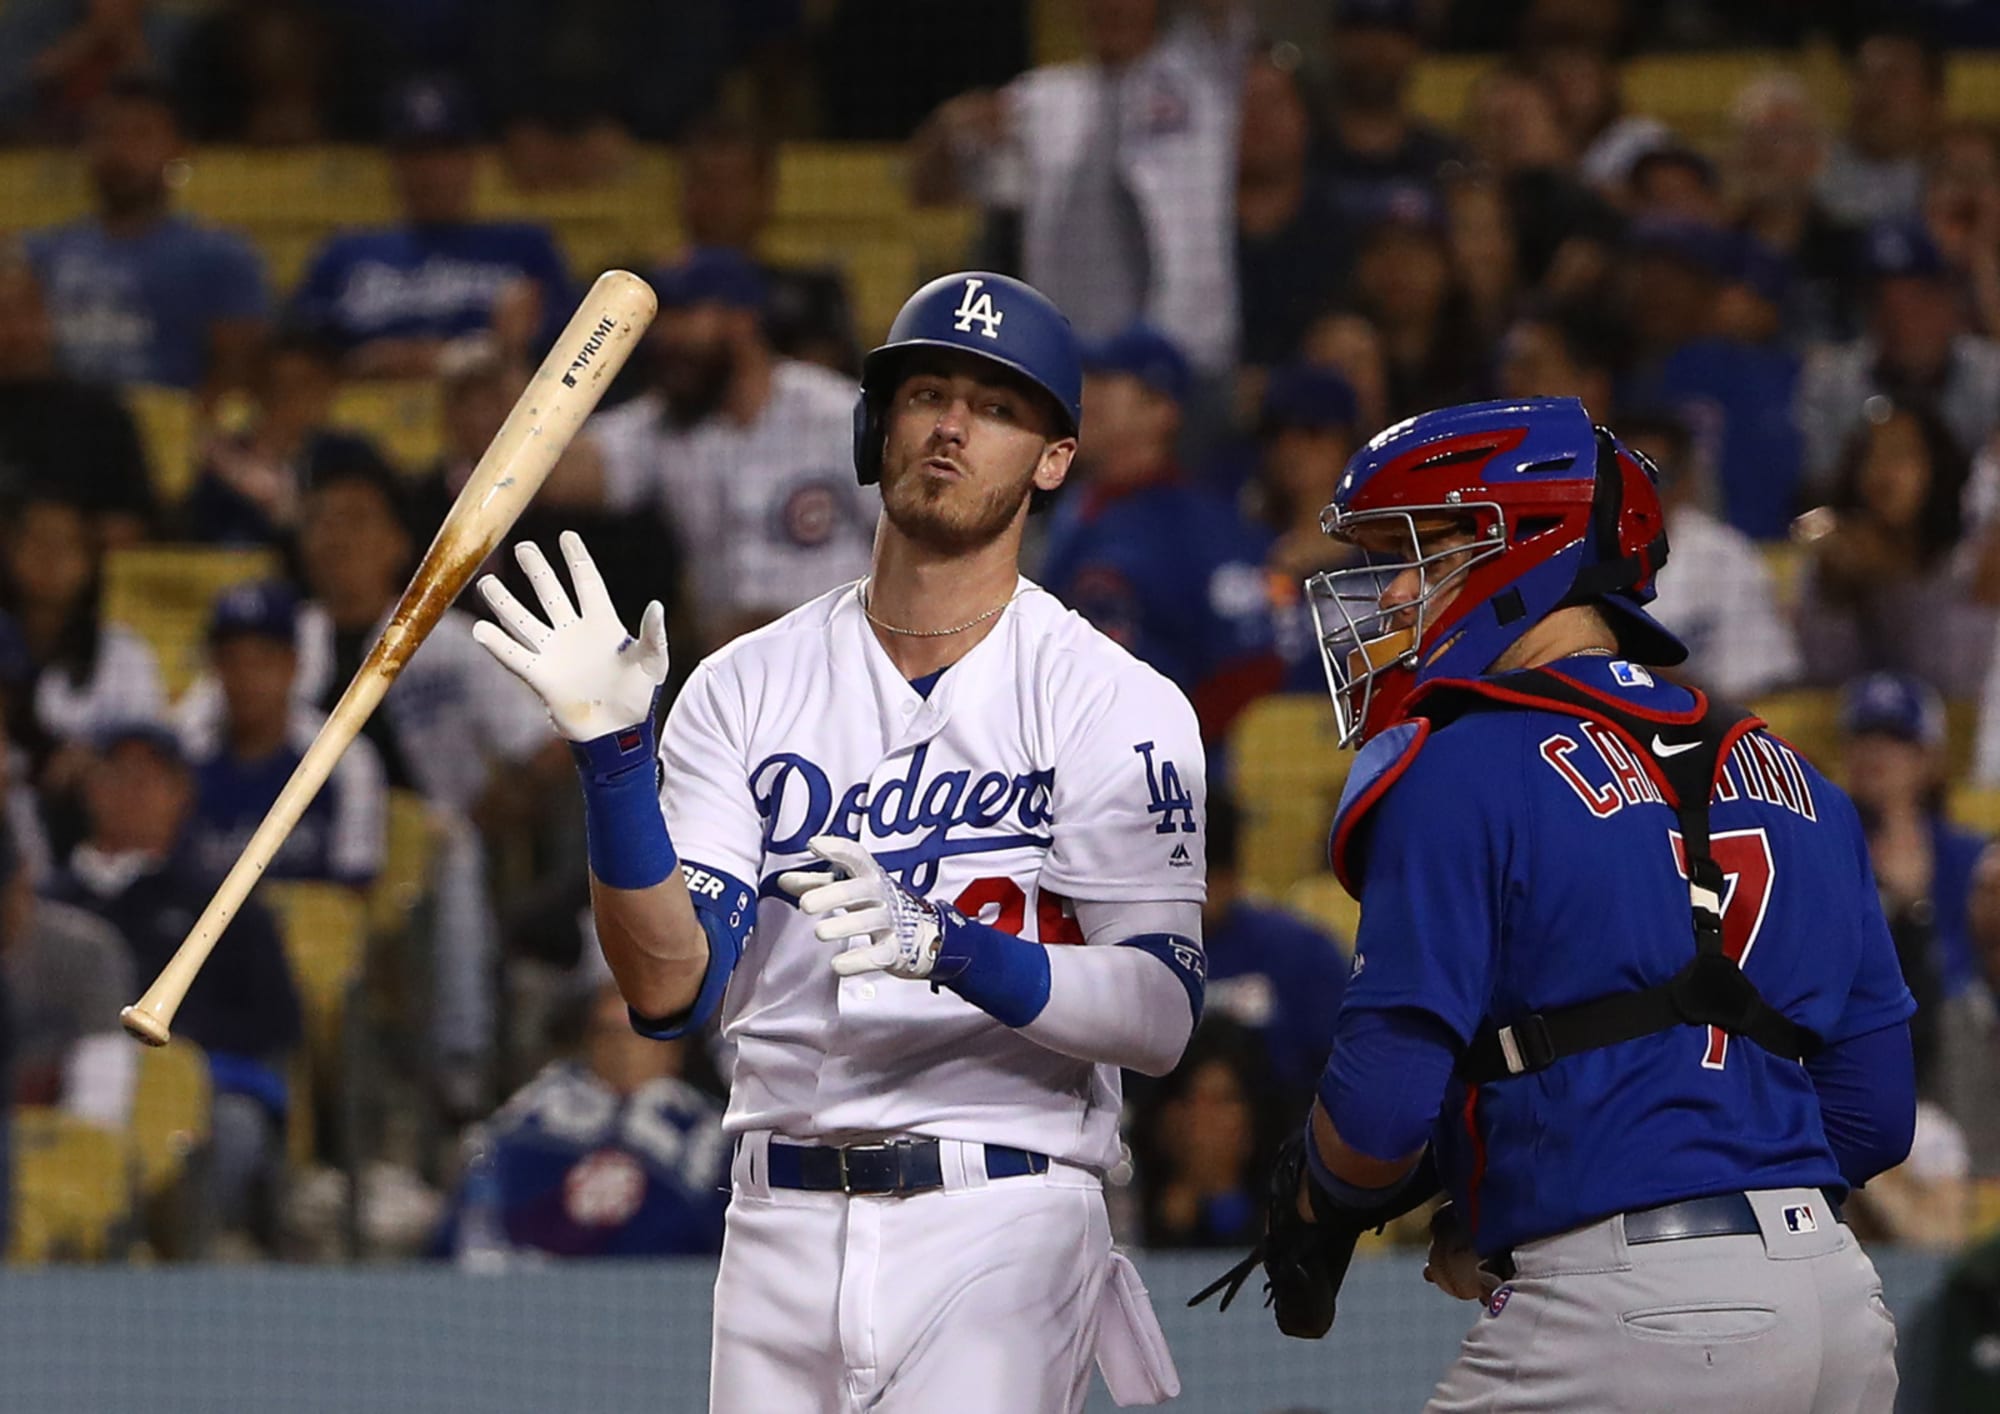 Just how talented are the Dodgers lefthanded hitters?